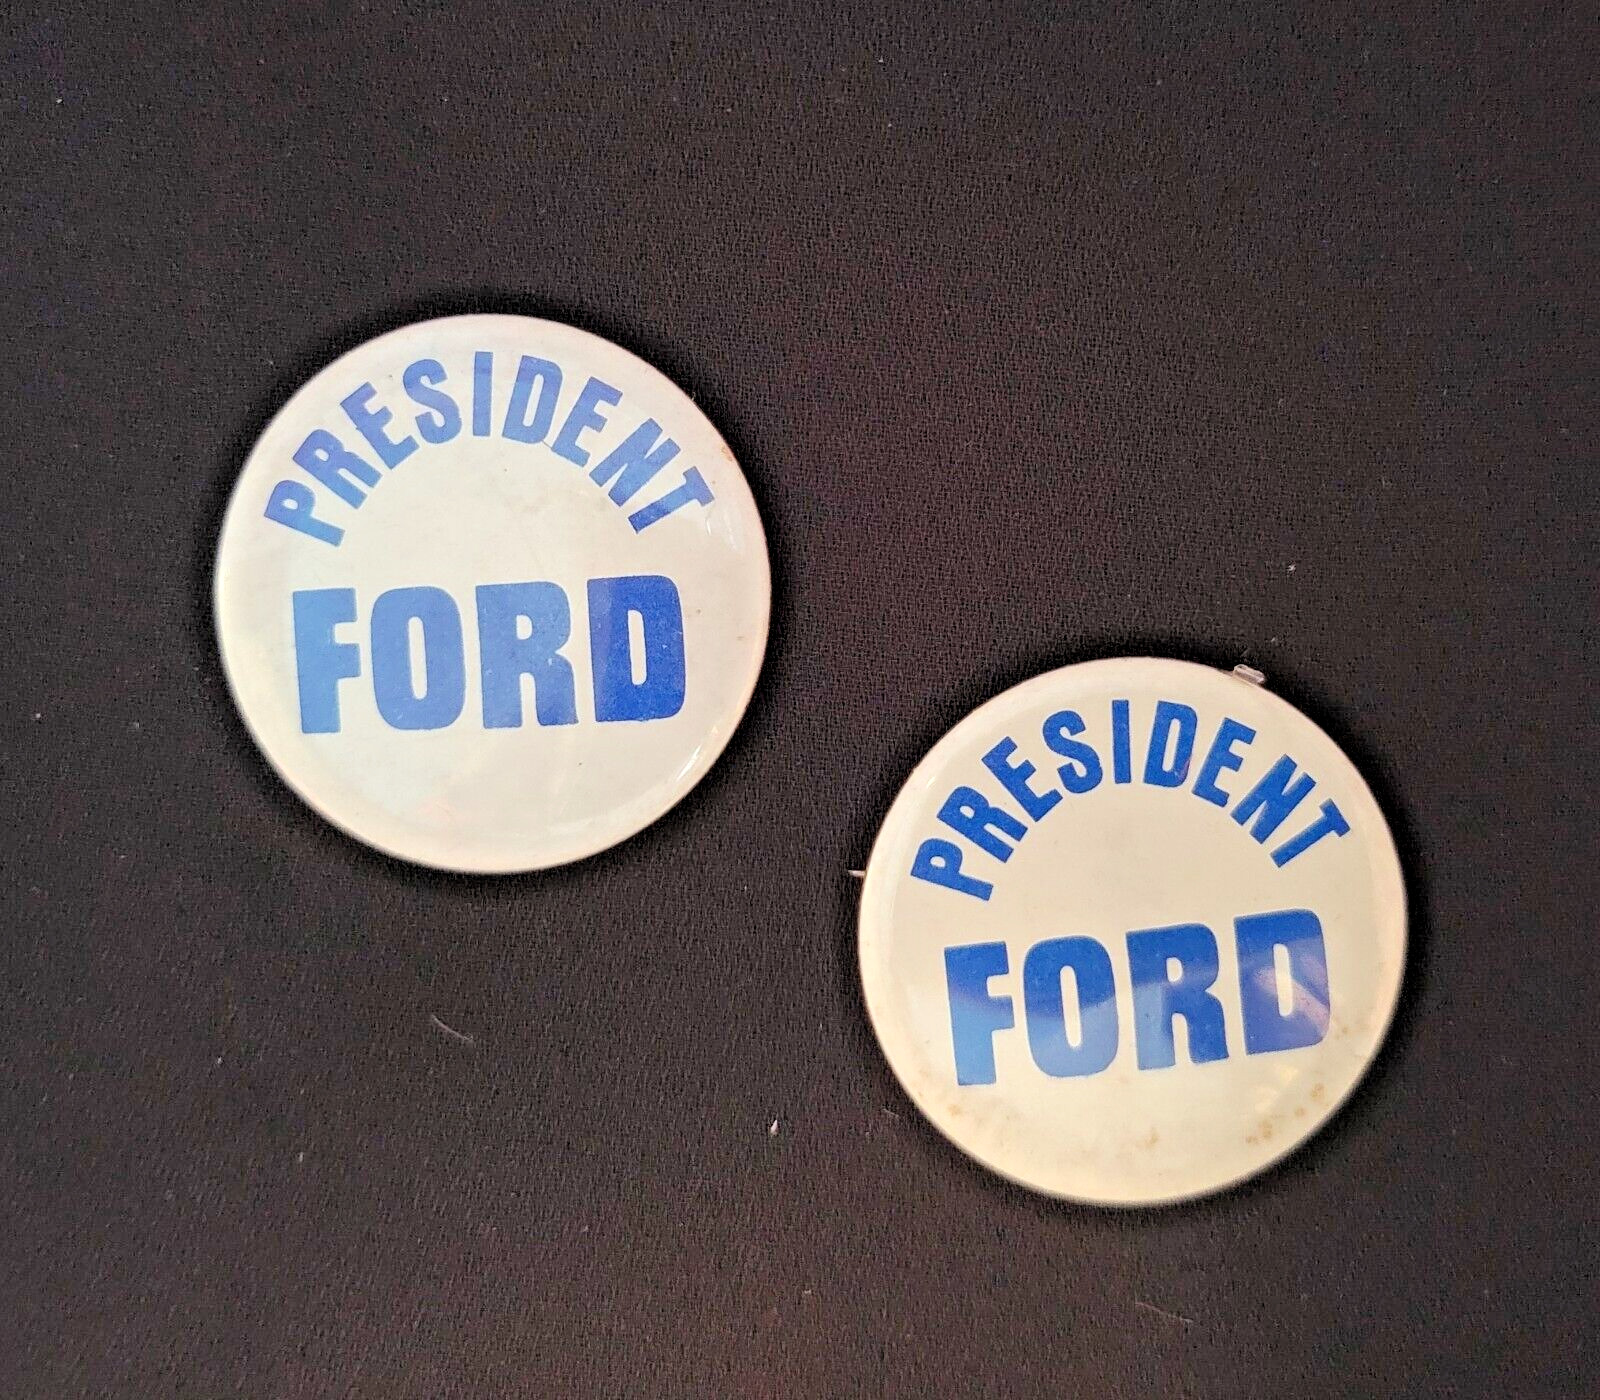 Gerald Ford - Presidential Campaign Pinbacks Buttons - 1976 EXCELLENT